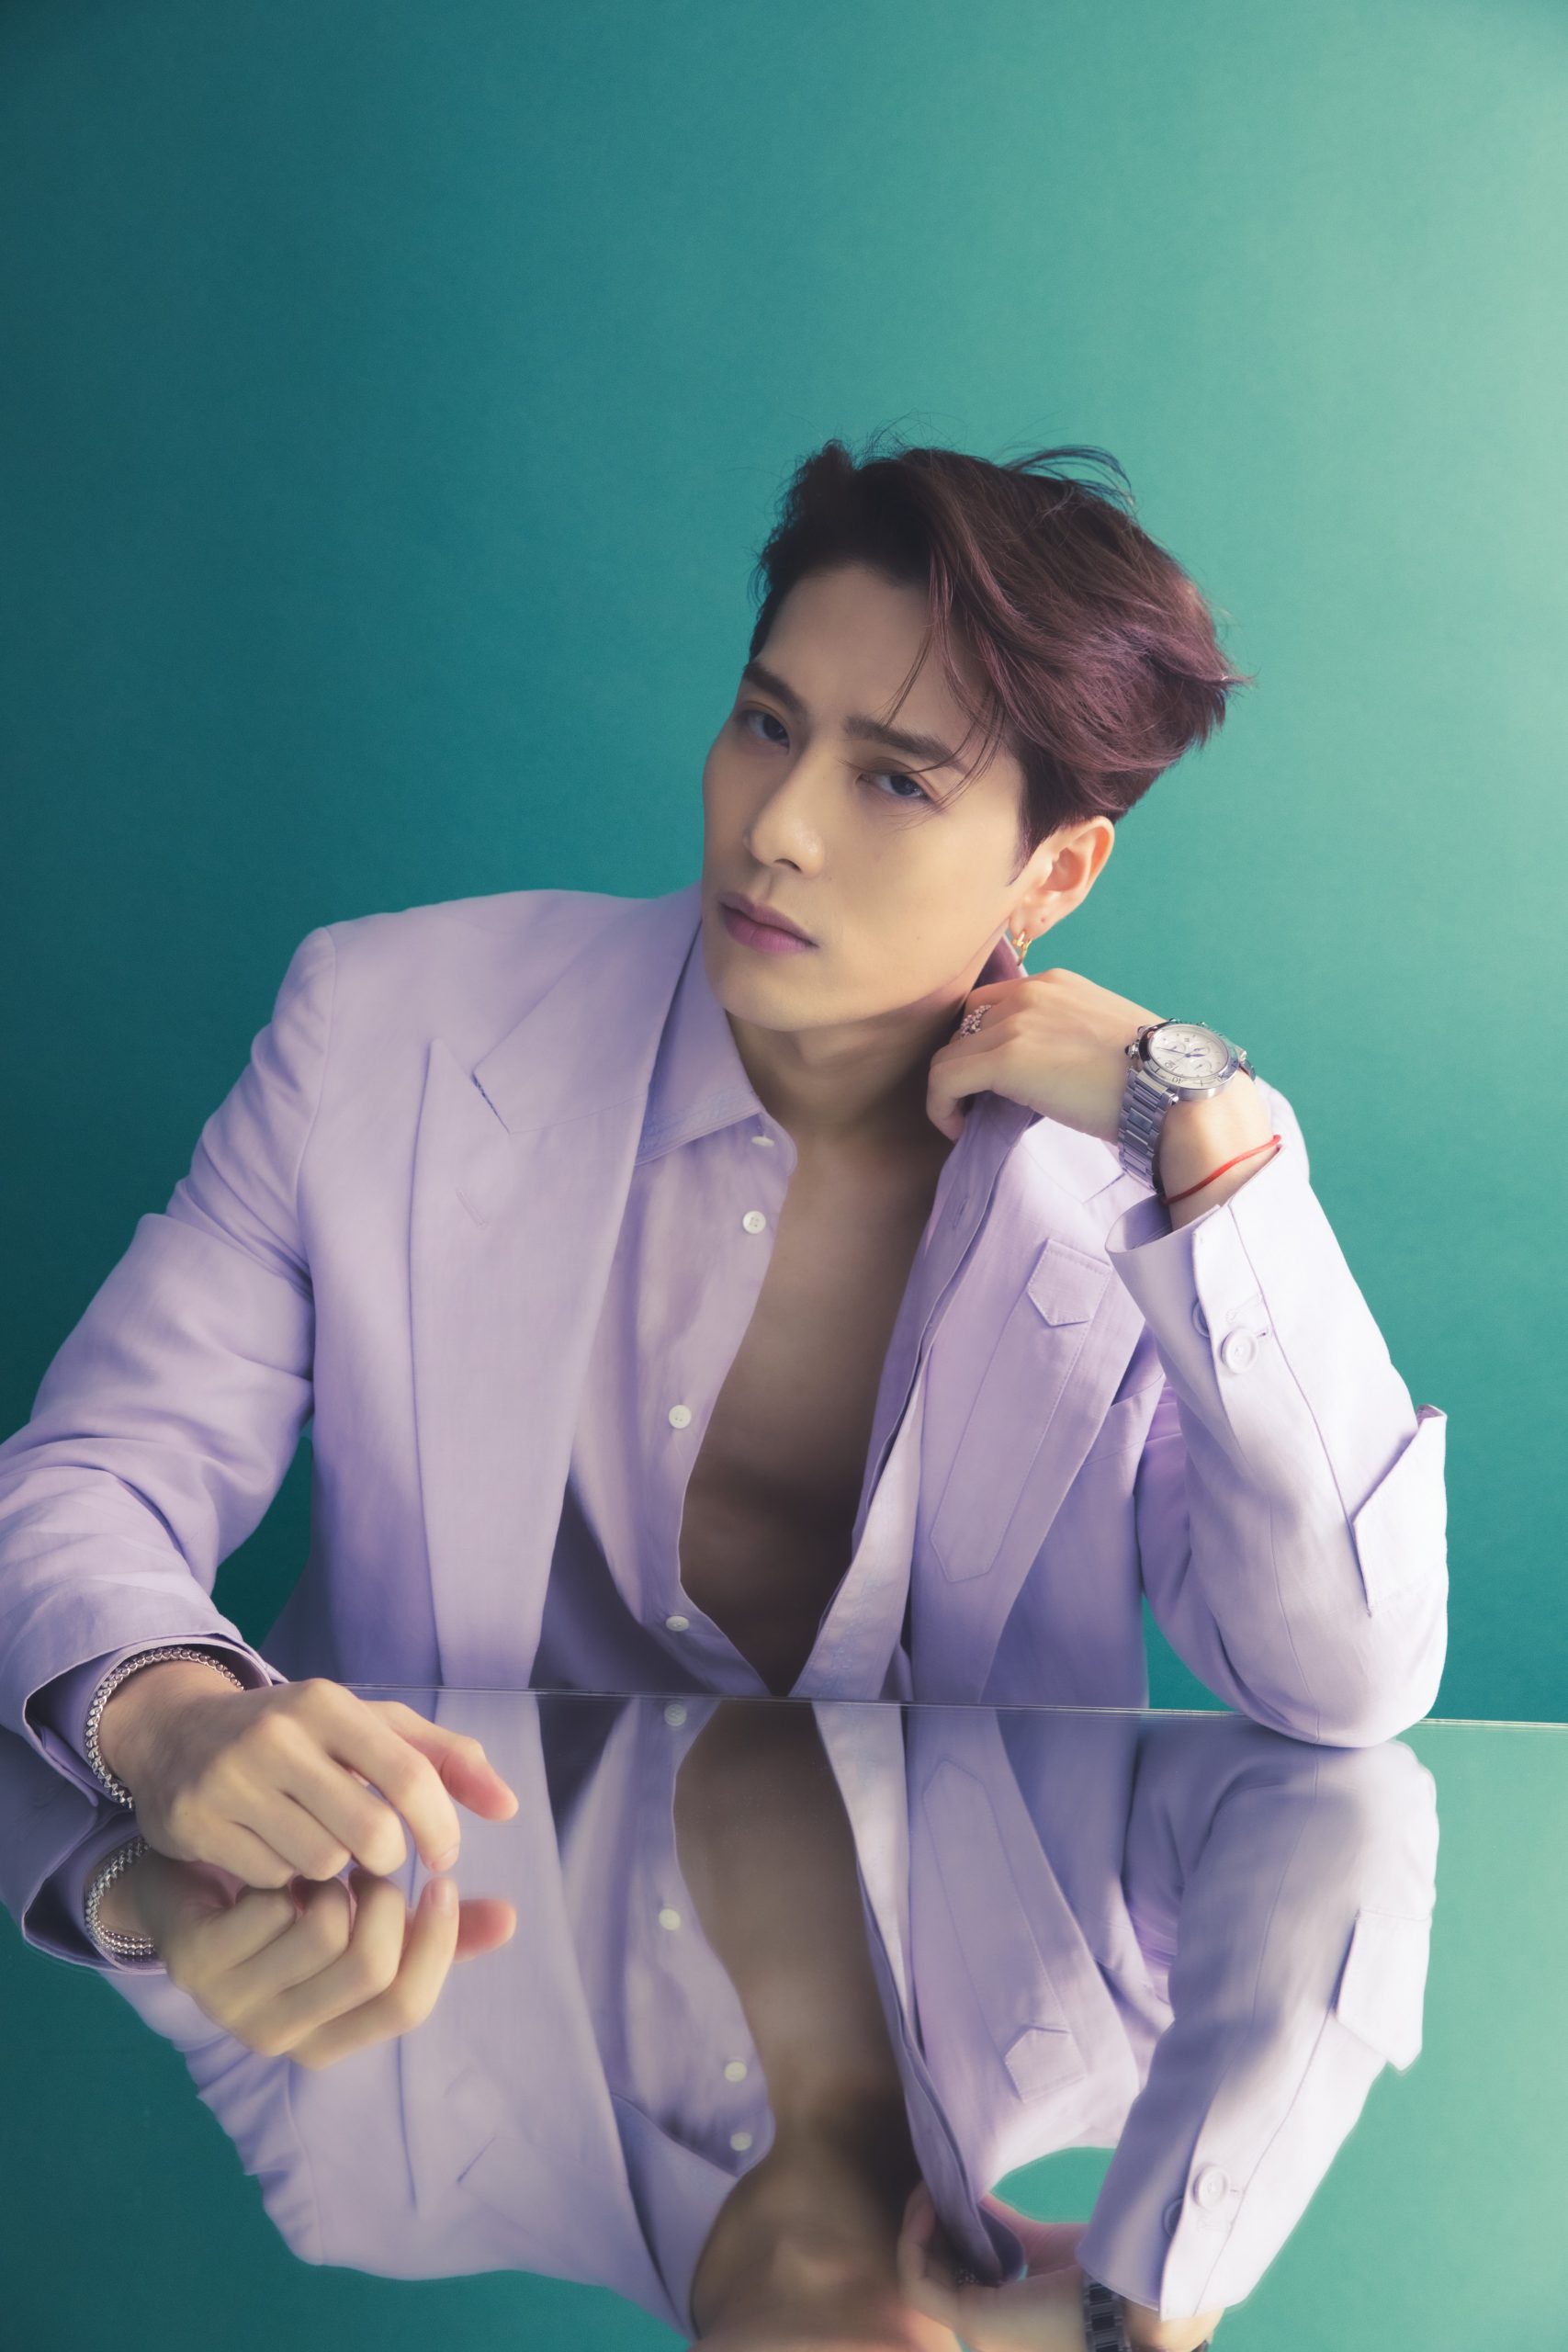 Jackson Wang is the new face of Fendi in China - Men's Folio Malaysia